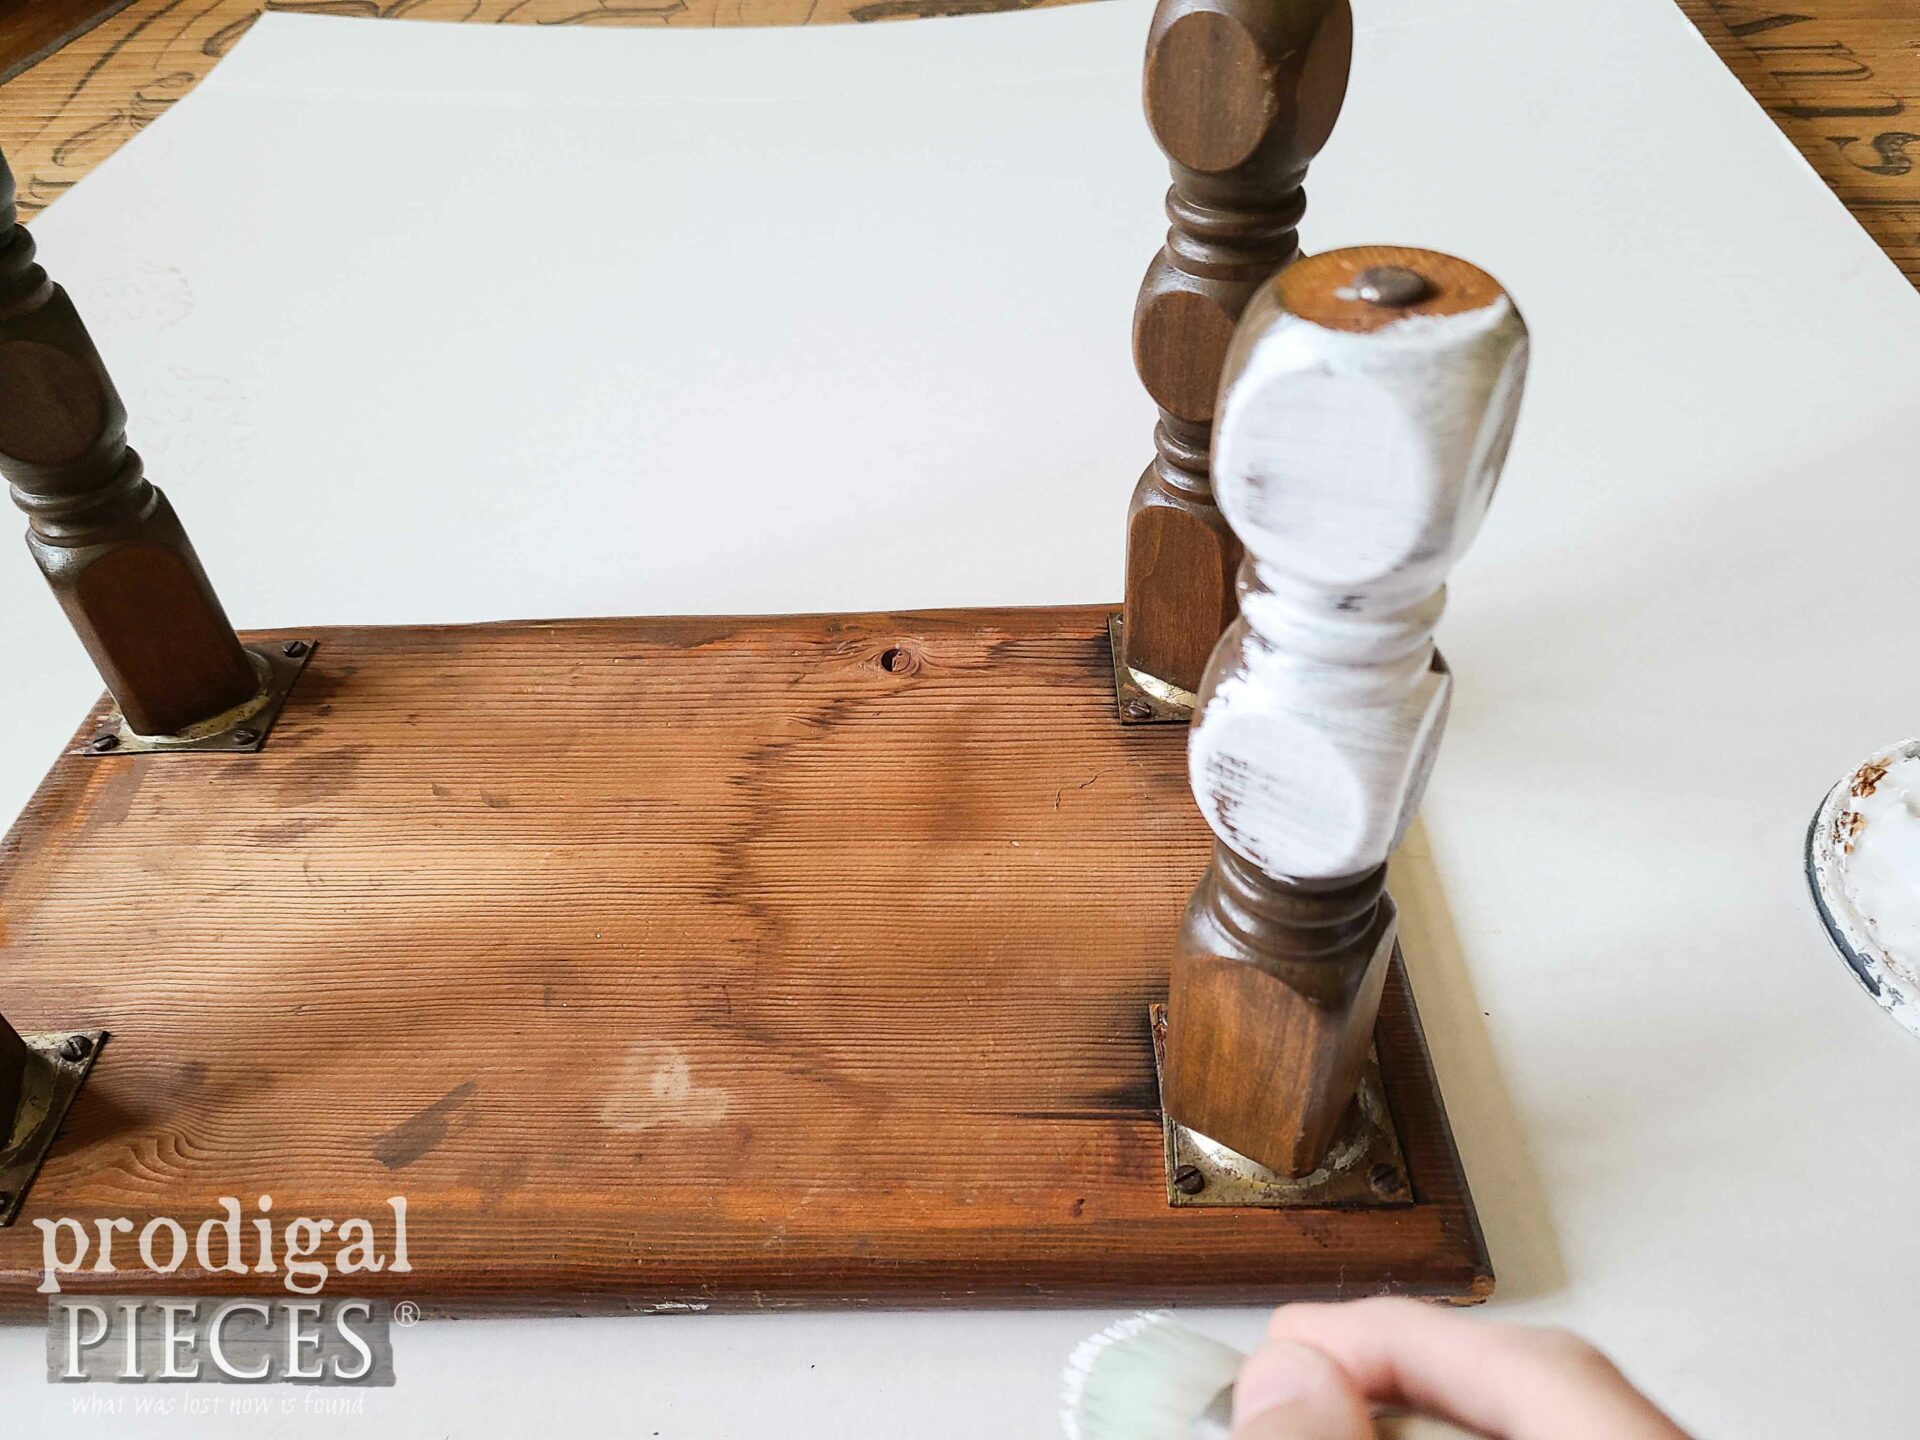 Painting Wooden Footstool Legs with White Paint | prodigalpieces.com #prodigalpieces